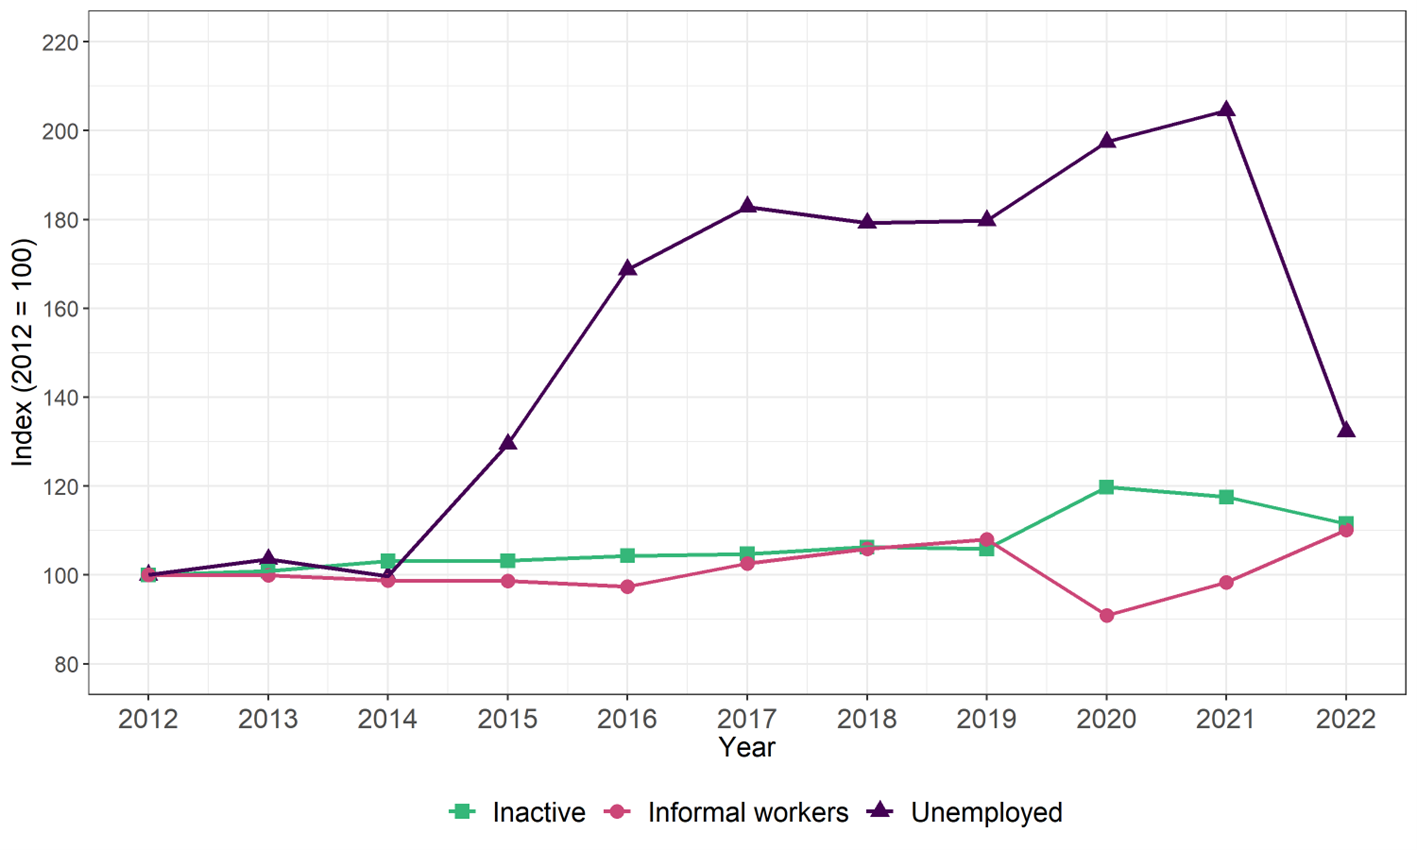 Figure 1: Evolution in the number of inactive people, informal workers, and unemployed individuals